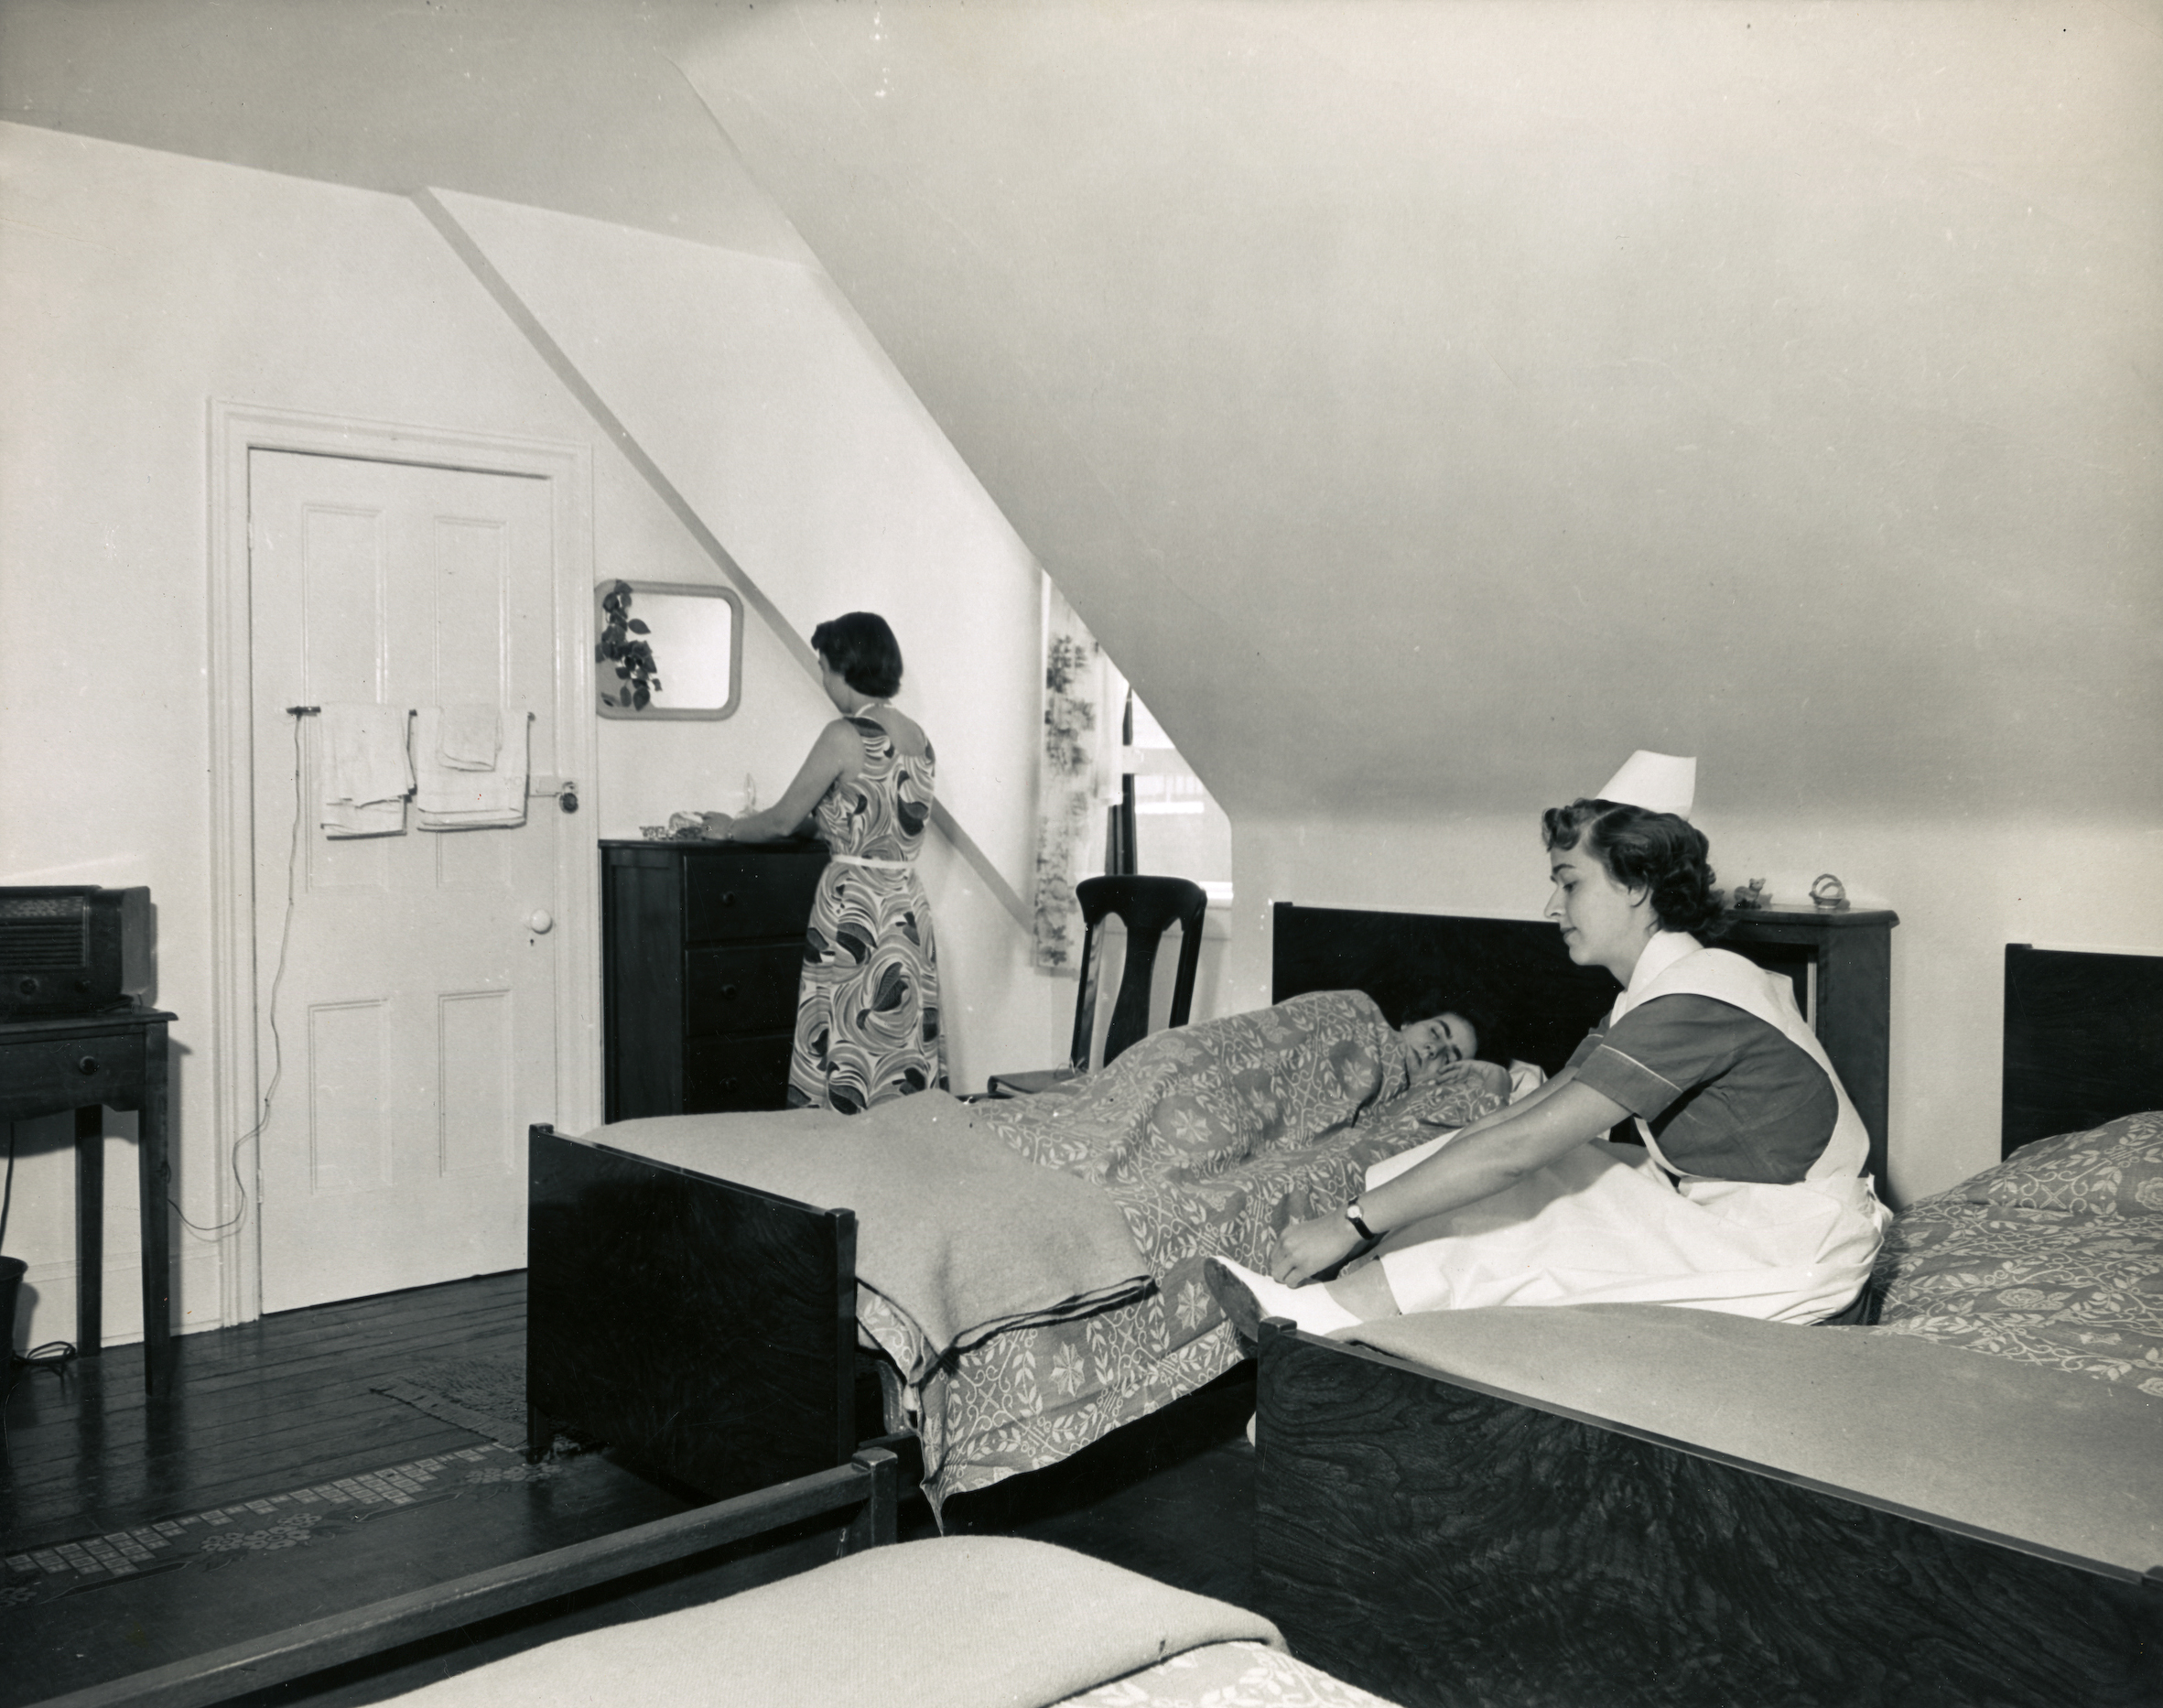 A woman in a dress before a mirror, another in nurse's uniform sitting on a bed, and a third sleeping. Three beds in the room.